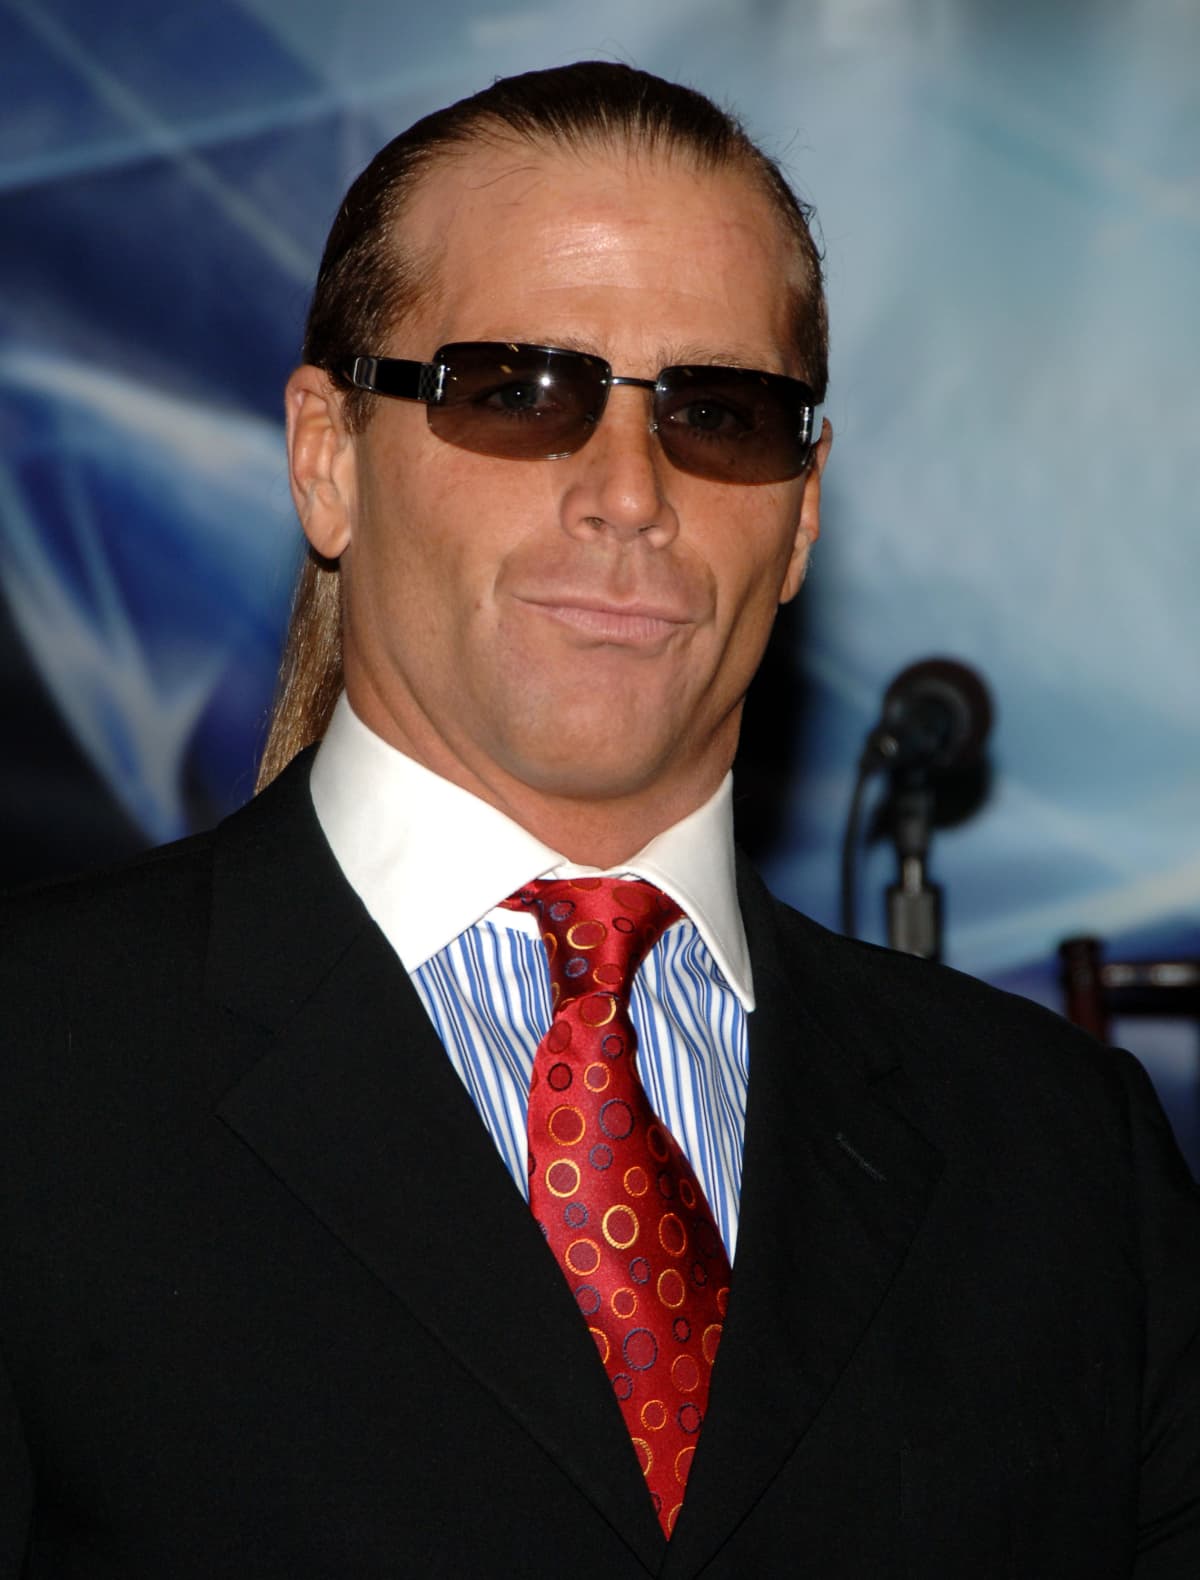 NORTH HOLLYWOOD, CA - JUNE 06:  Shawn Michaels attends WWE's First-Ever Emmy "For Your Consideration" Event at Saban Media Center on June 6, 2018 in North Hollywood, California.  (Photo by Jon Kopaloff/Getty Images)